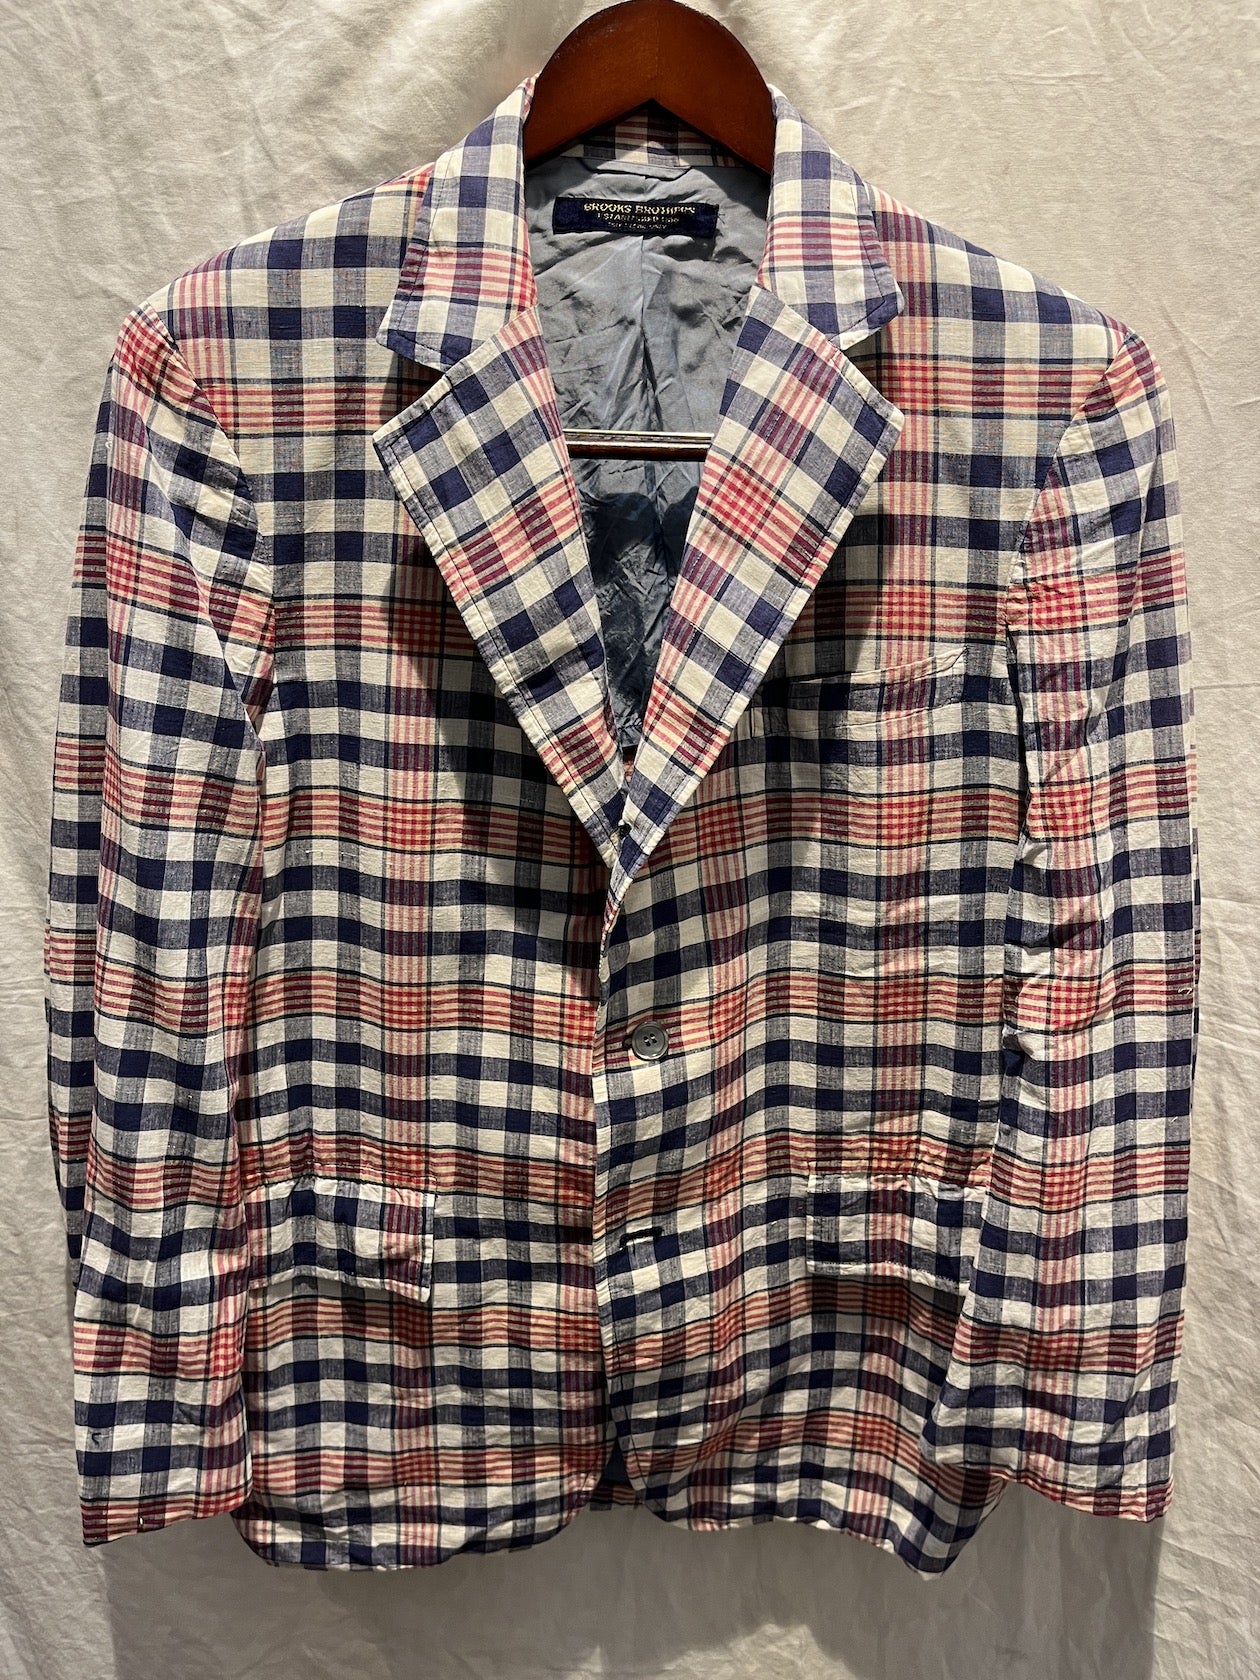 VINTAGE BROOKS BROTHERS MADE IN U.S.A | ILLMINATE blog